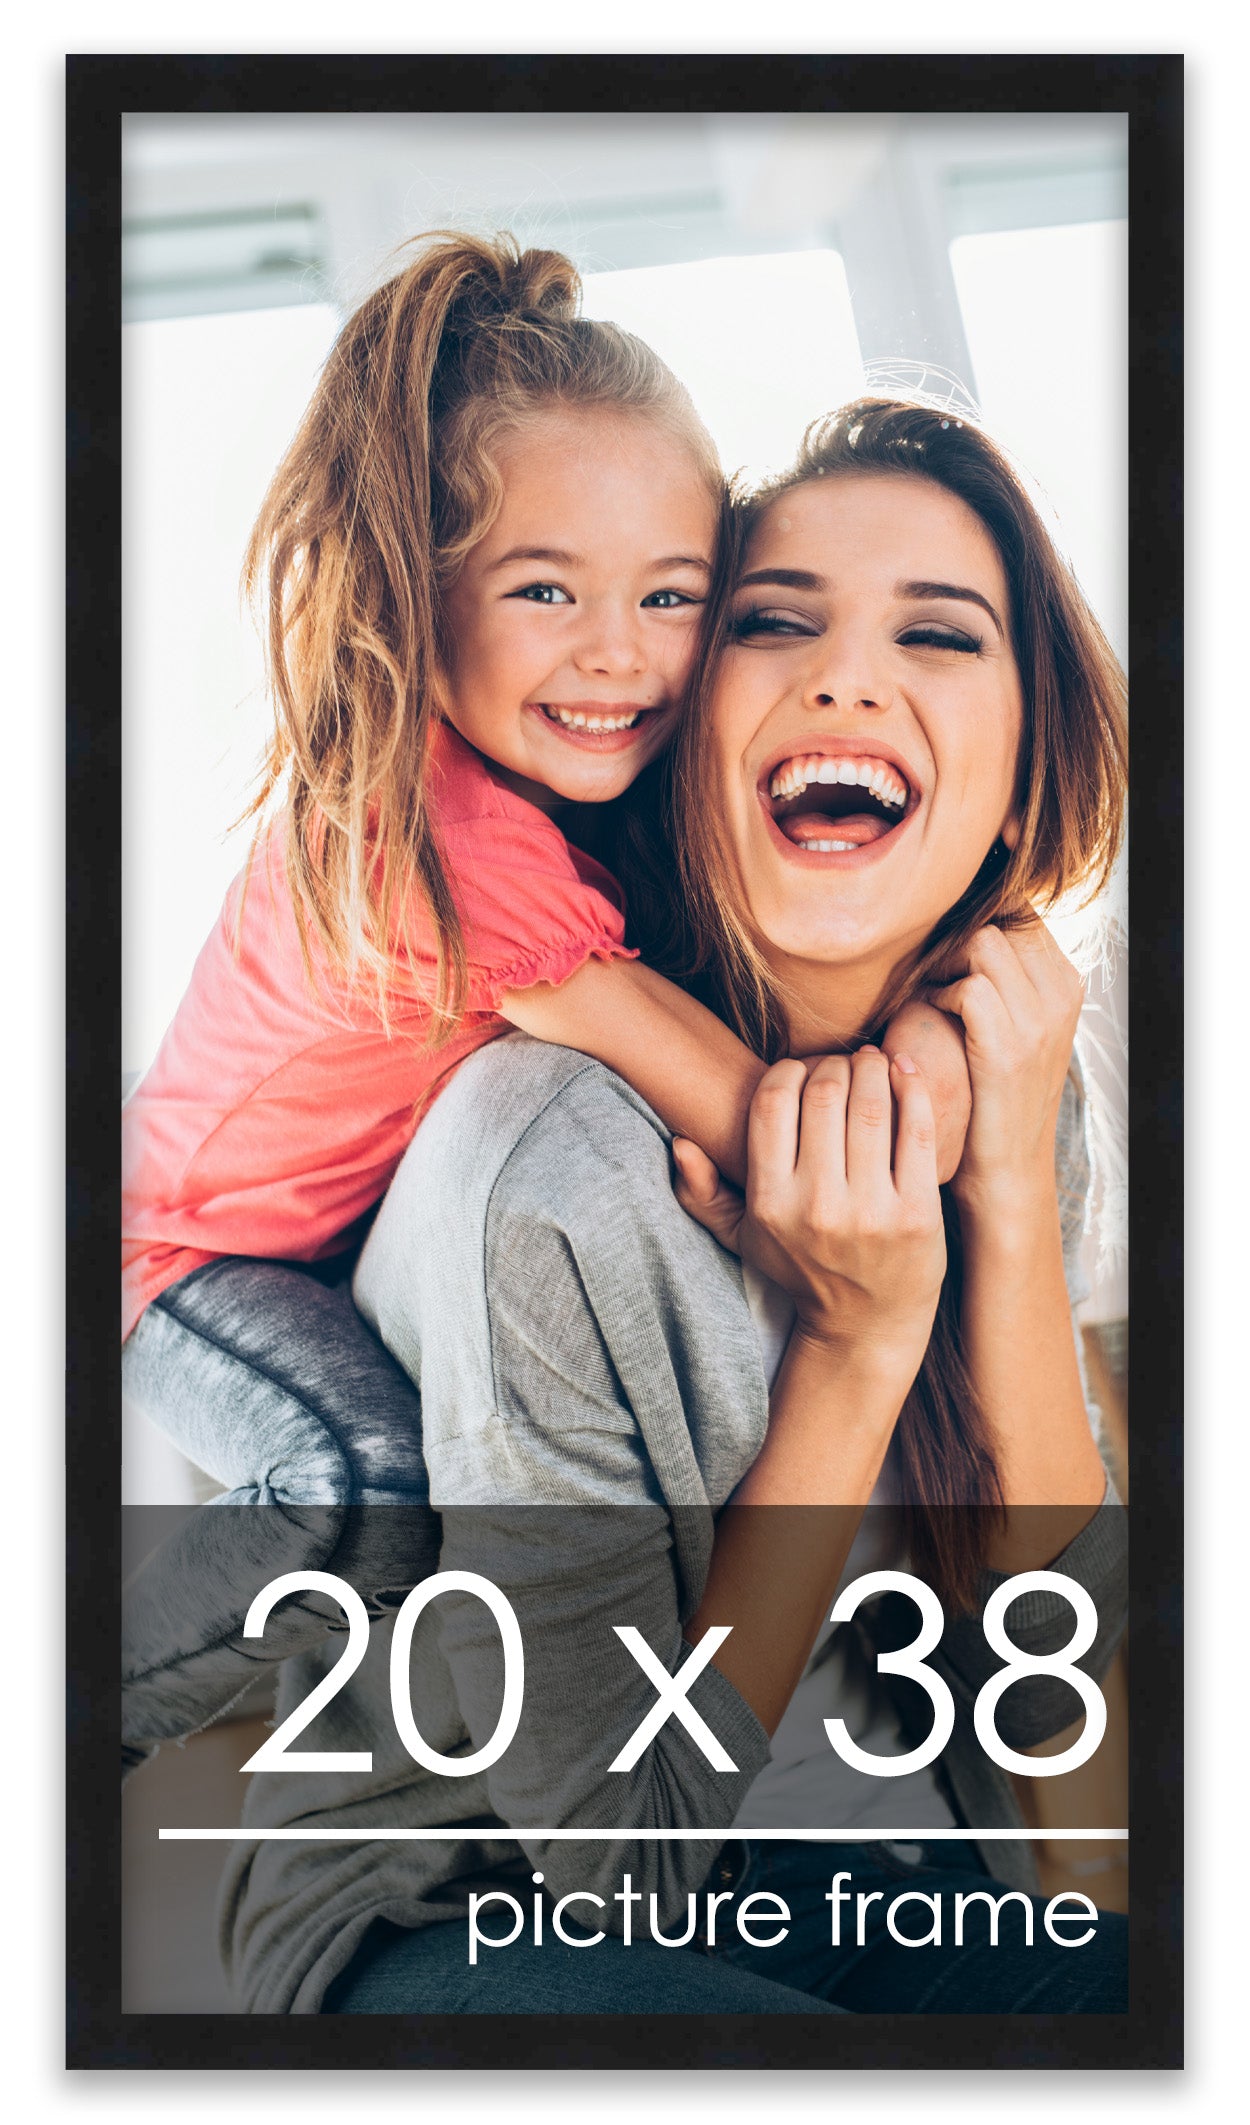 20x38 Picture Frame Black Solid Pine Wood 0.75 Inch Wide